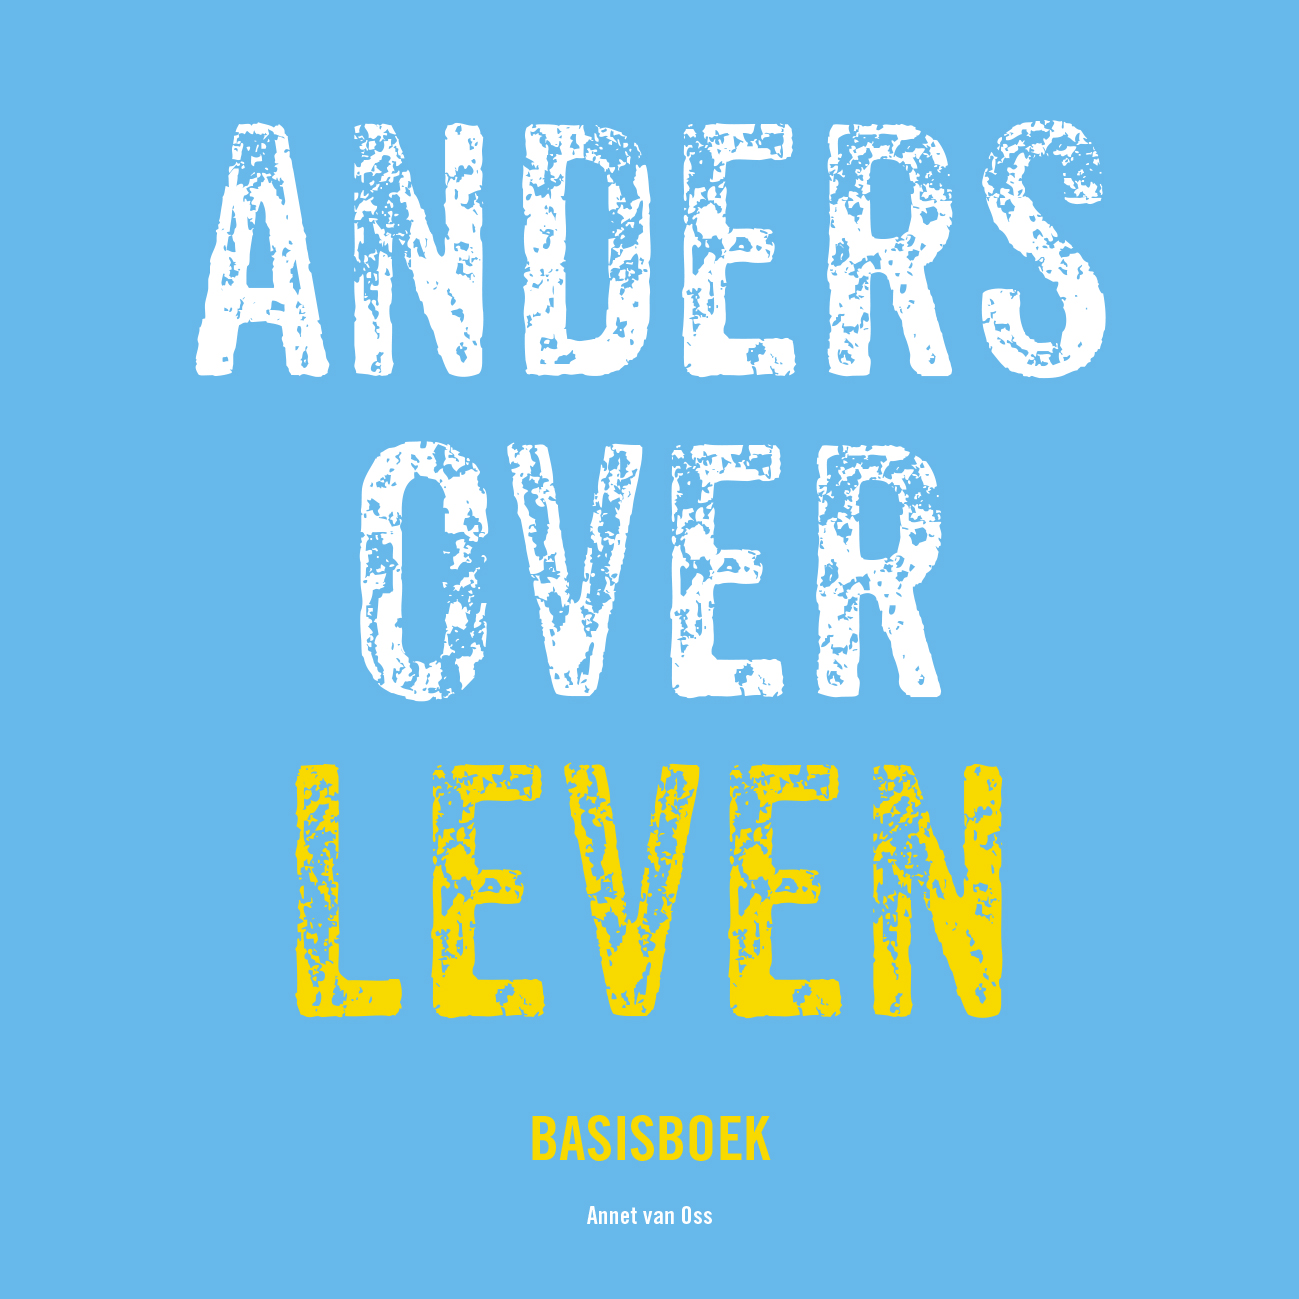 Anders over leven